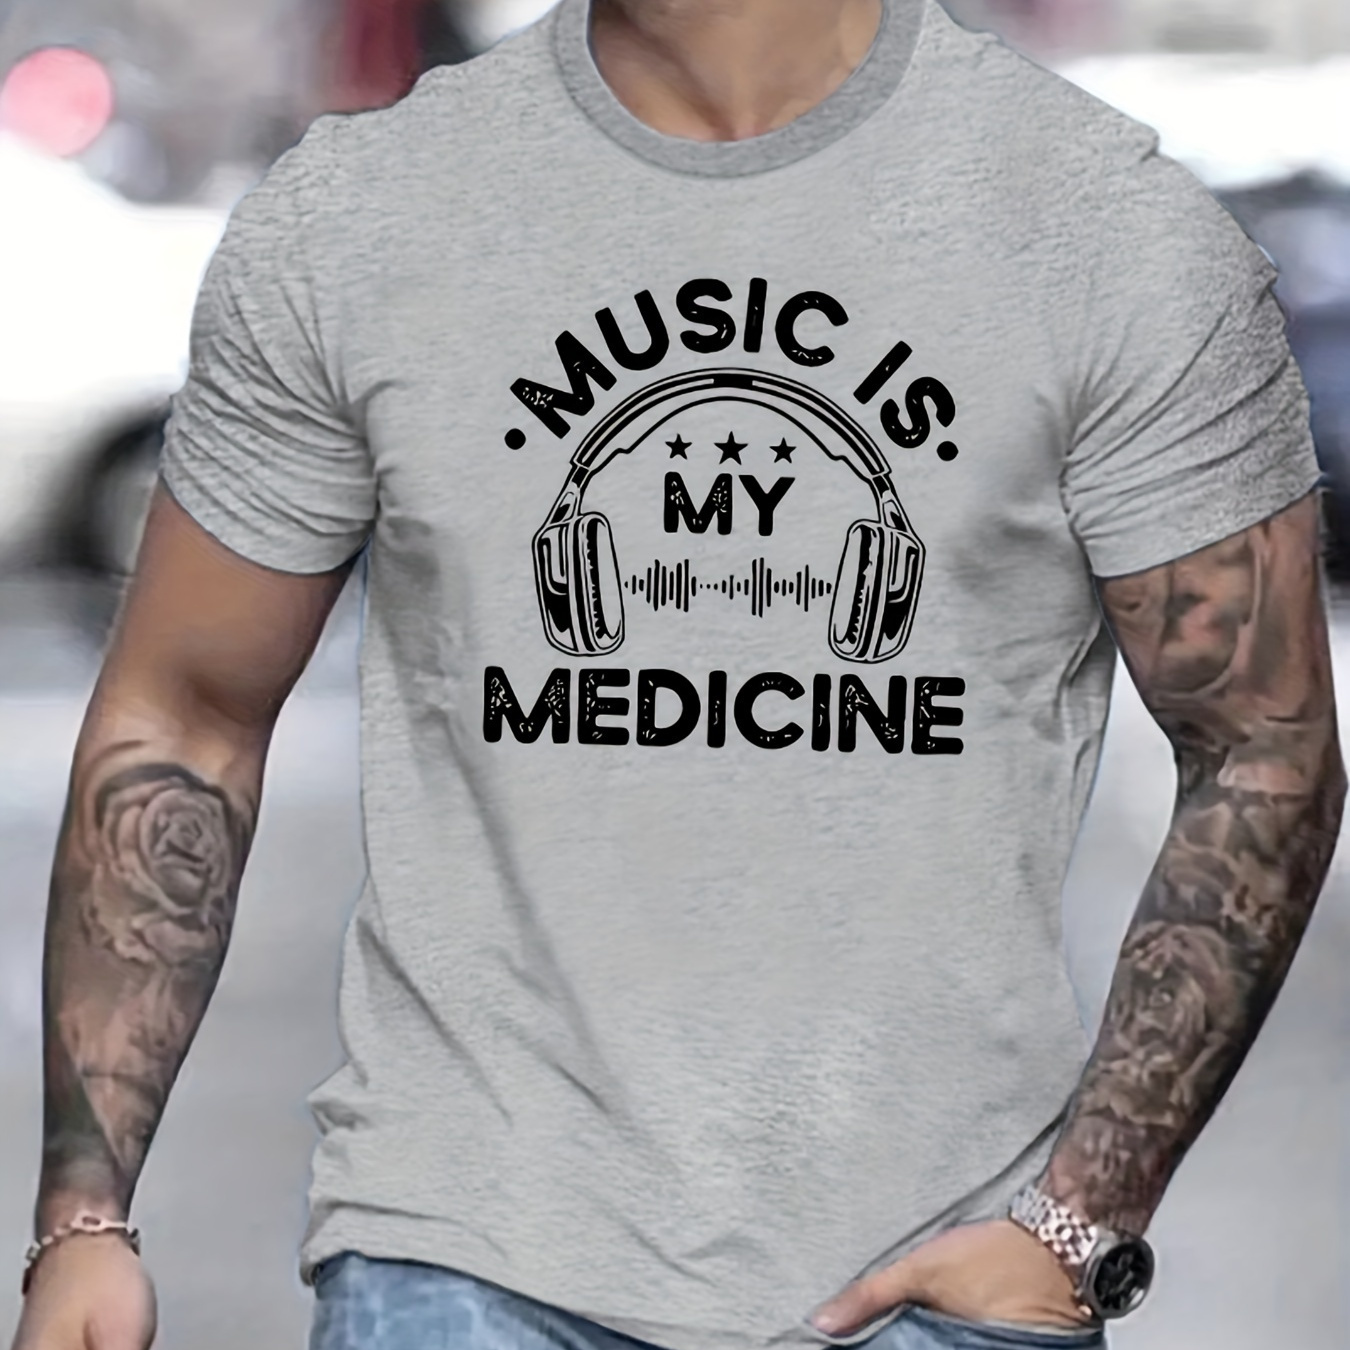 

Music Is My Medicine Print T Shirt, Tees For Men, Casual Short Sleeve T-shirt For Summer